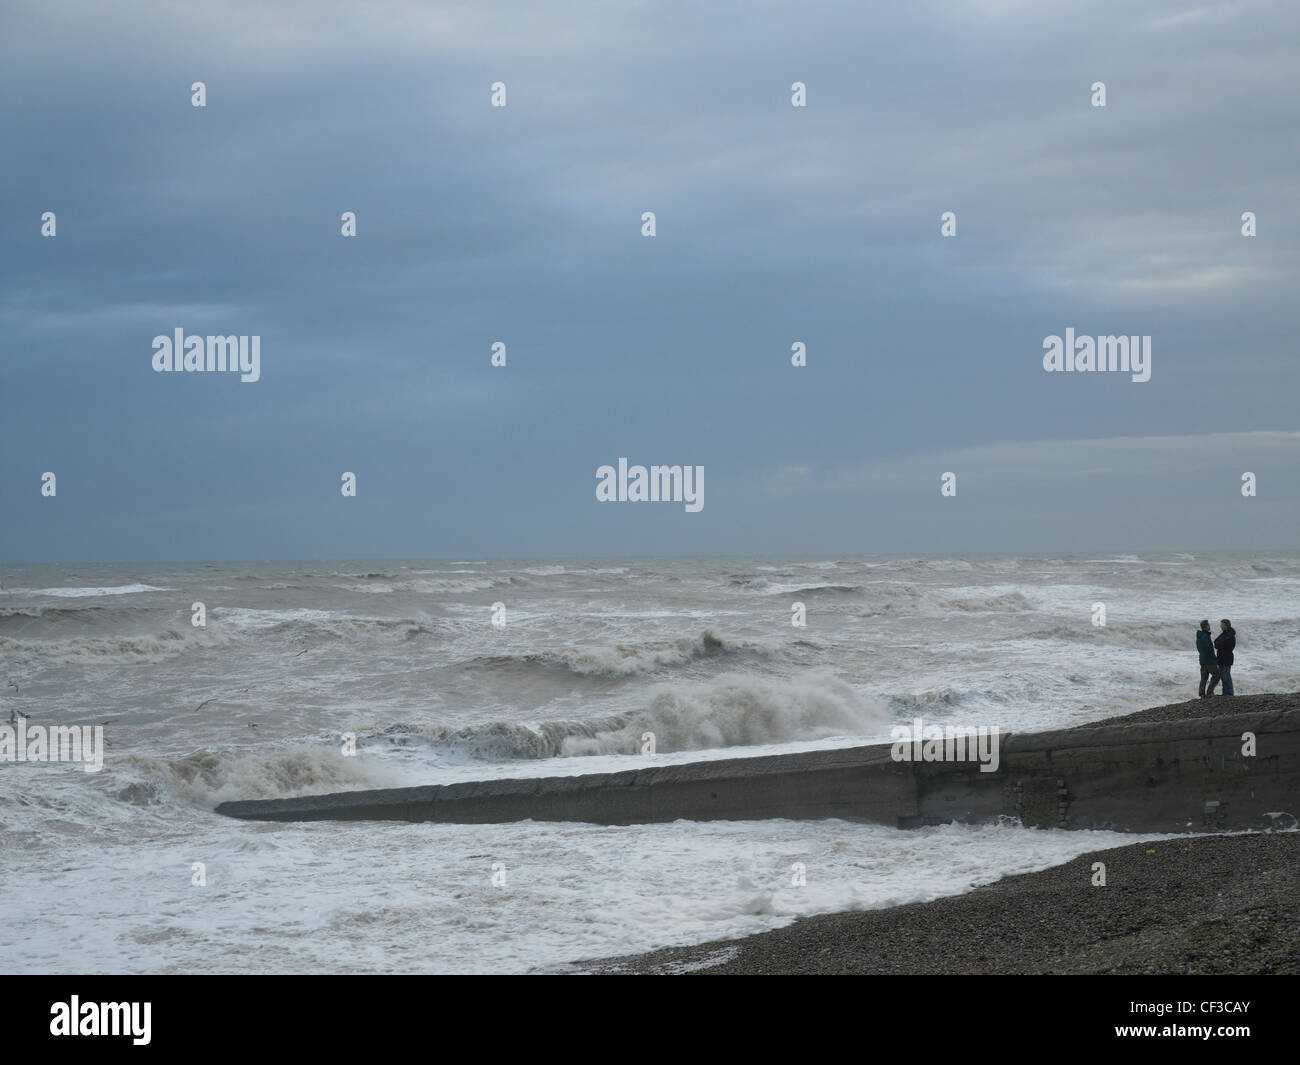 A stormy sea under grey skies with waves crashing on Brighton shore. Stock Photo